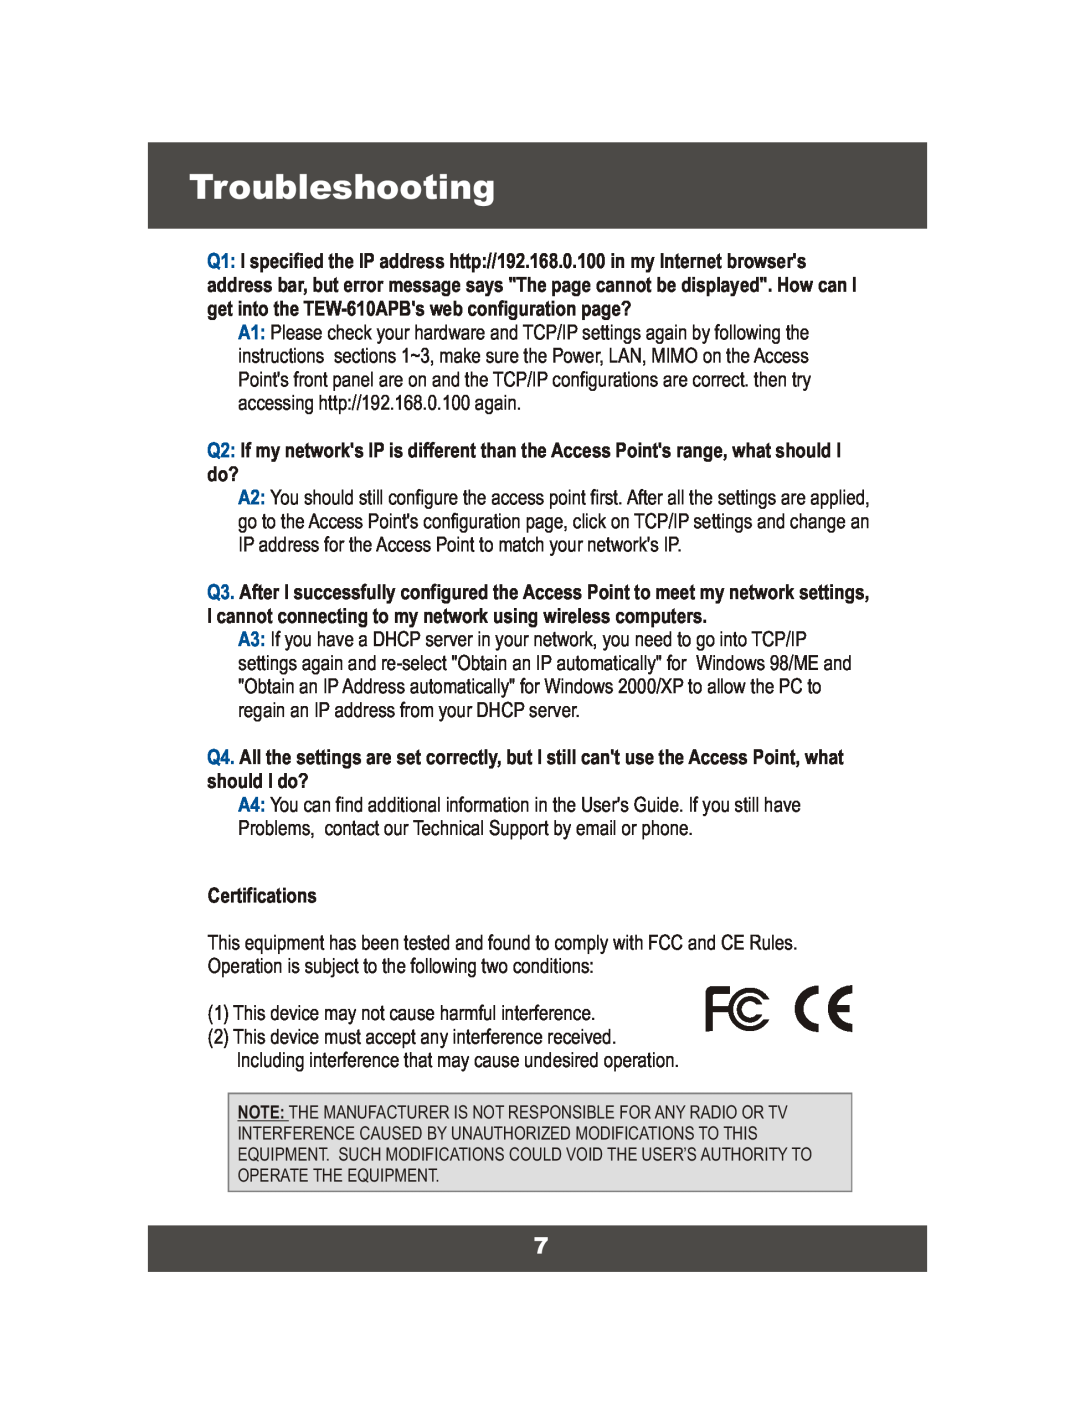 TRENDnet TEW-610APB, Wireless Access Point manual Troubleshooting 